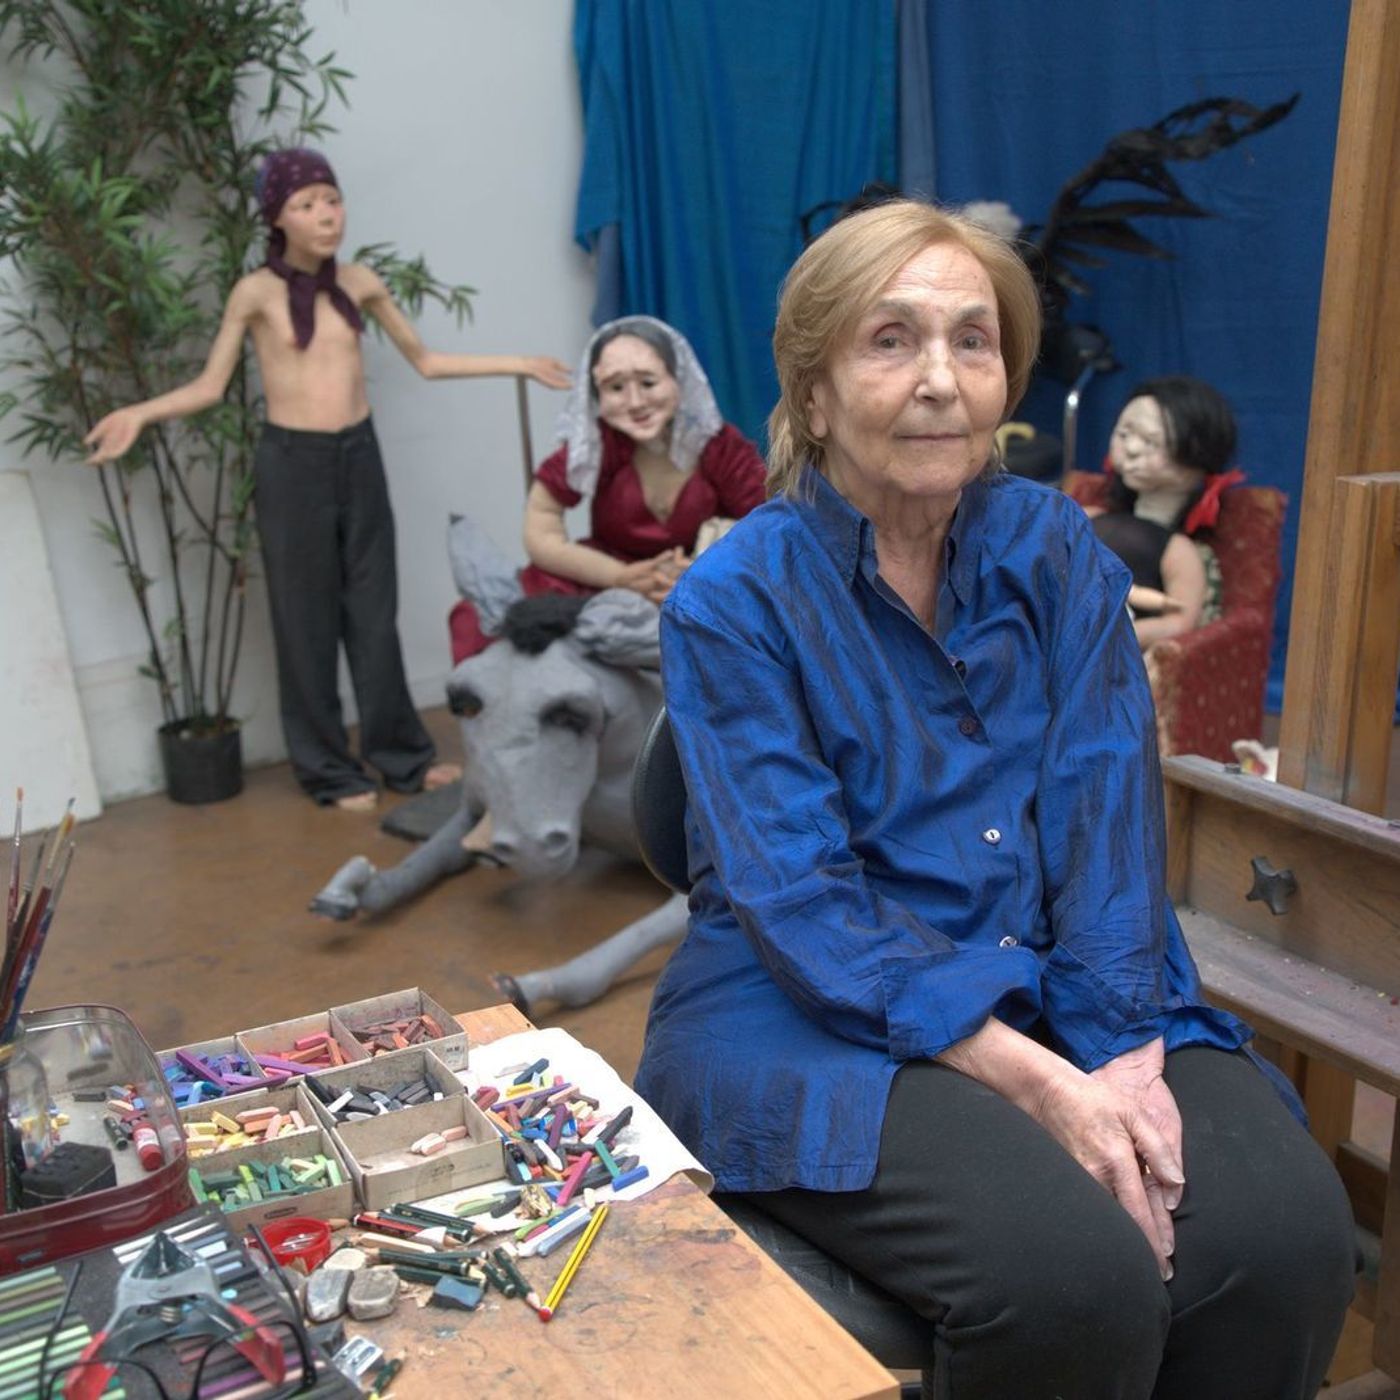 2: Paula Rego: One of the greatest figurative artists of her generation, who places women at the centre of her work